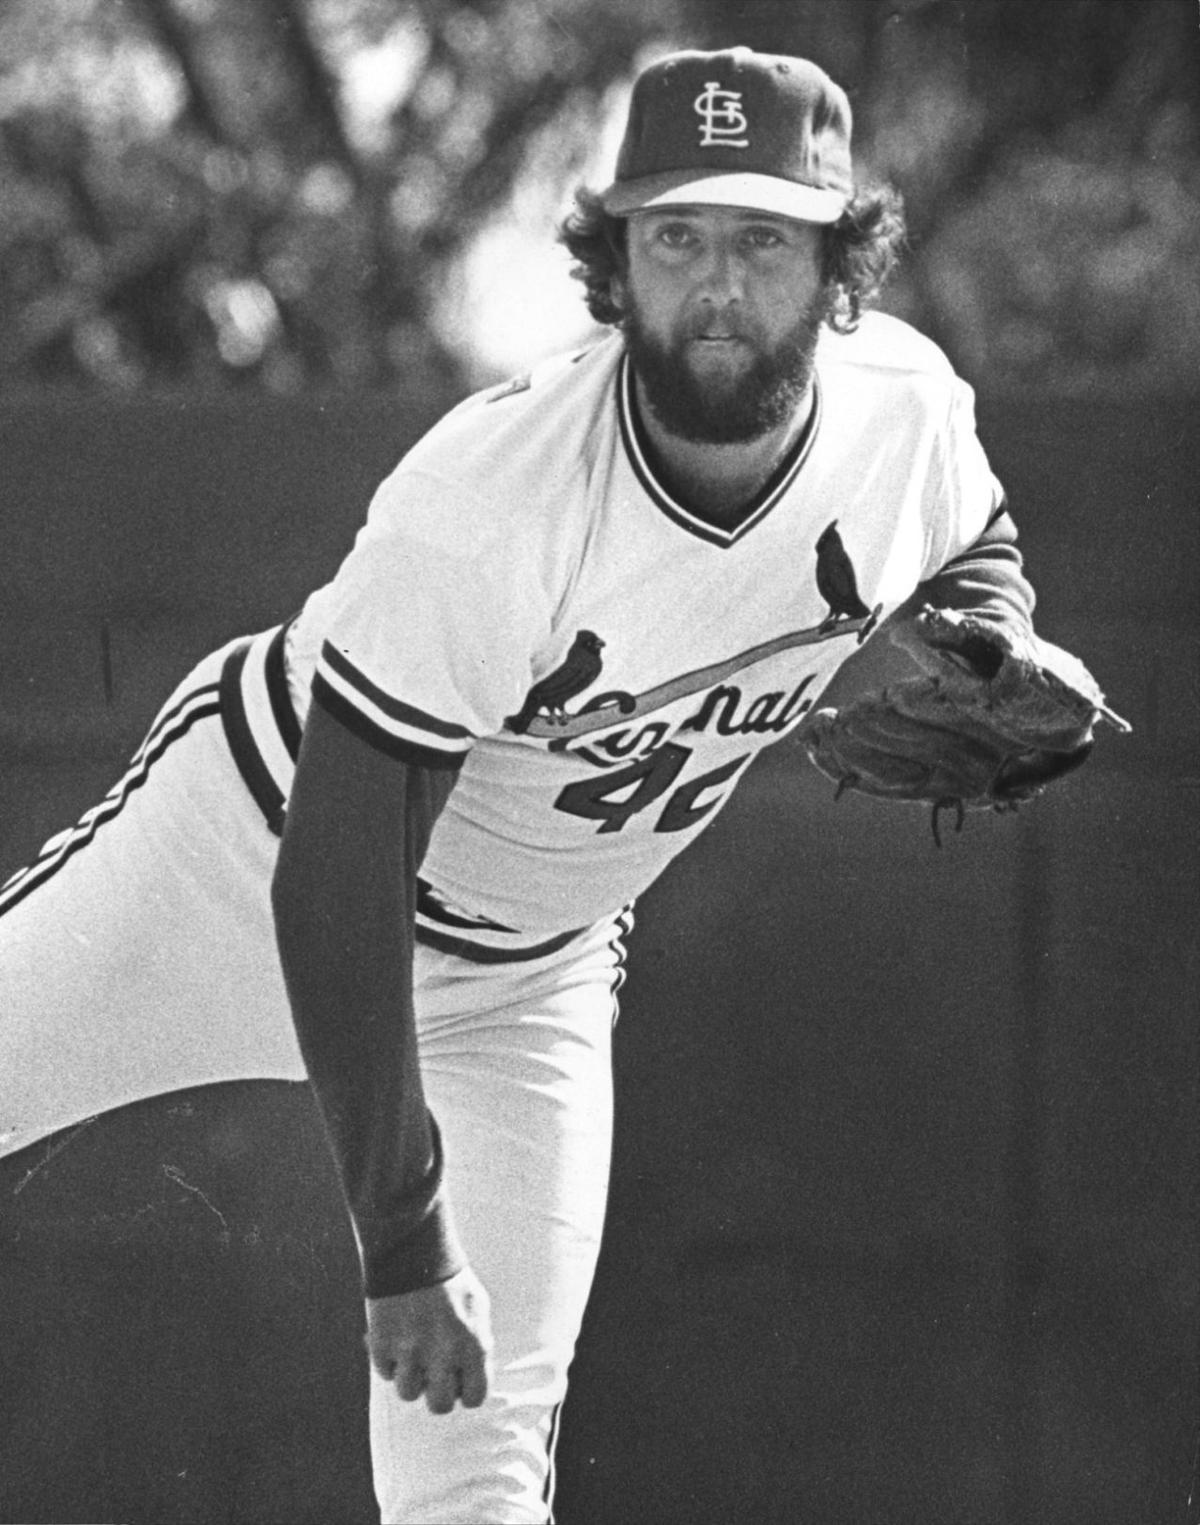 TIL In 1982, Ozzie Smith agreed to pay Whitey Herzog $1 for every